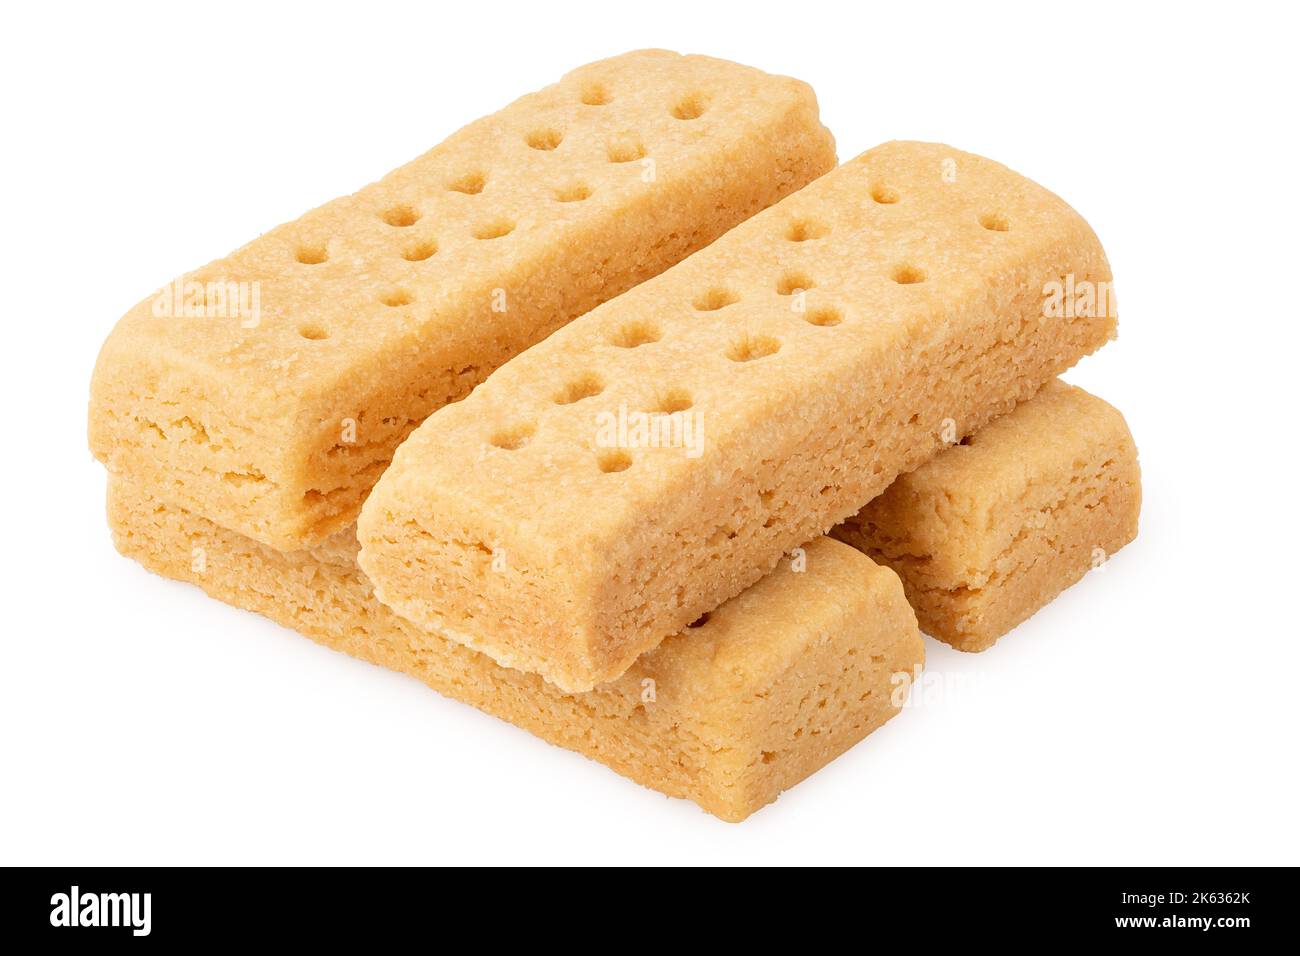 Stack of four butter shortbread finger biscuits isolated on white. Stock Photo